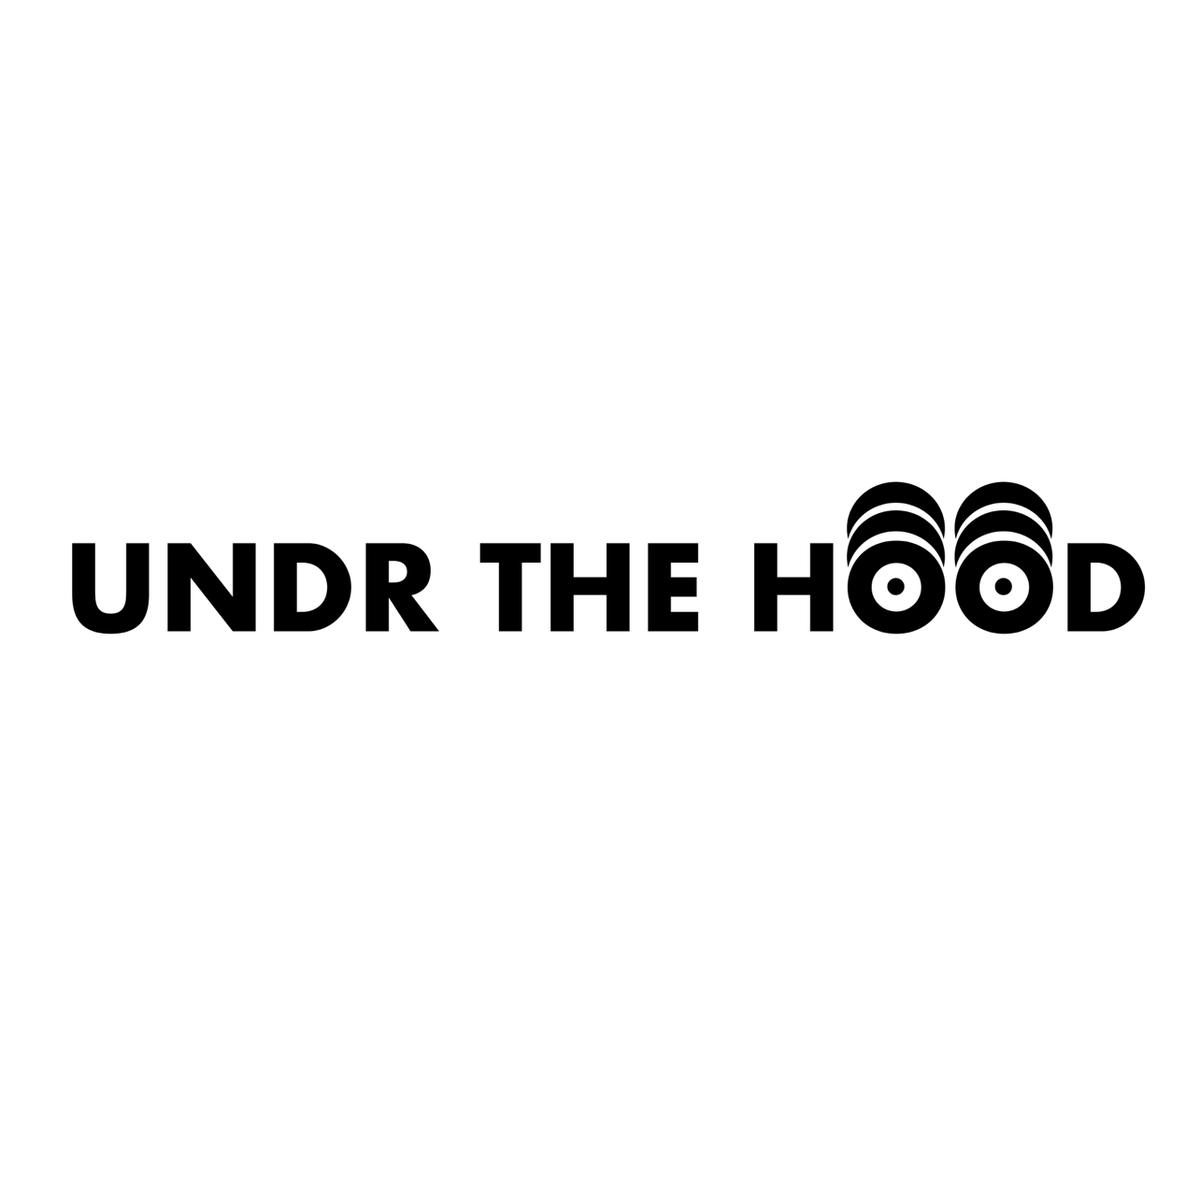 UNDR THE HOOD's images